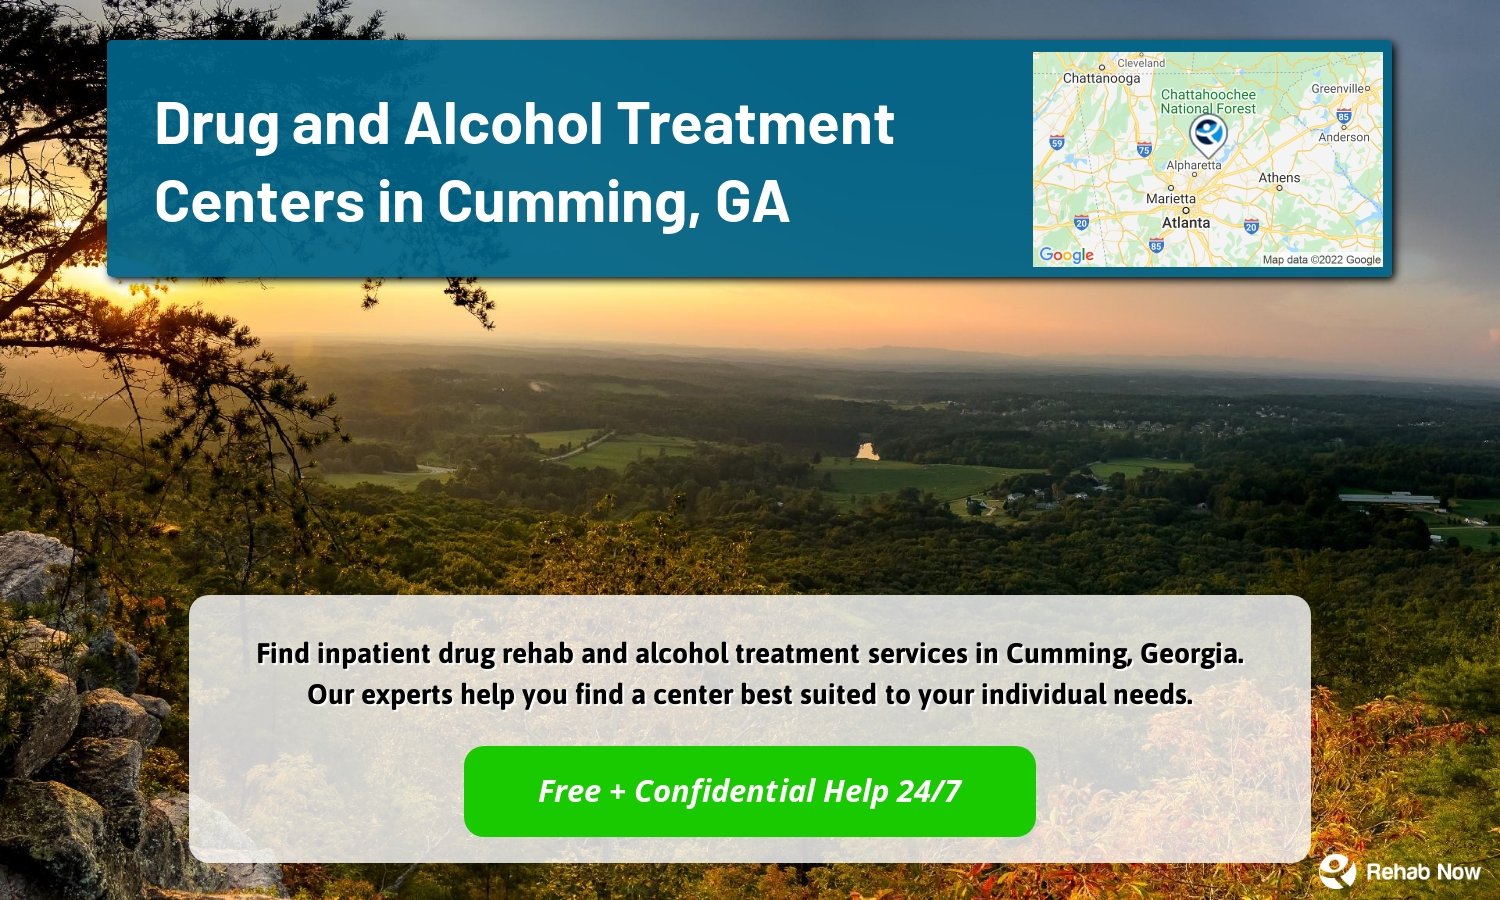 Find inpatient drug rehab and alcohol treatment services in Cumming, Georgia. Our experts help you find a center best suited to your individual needs.